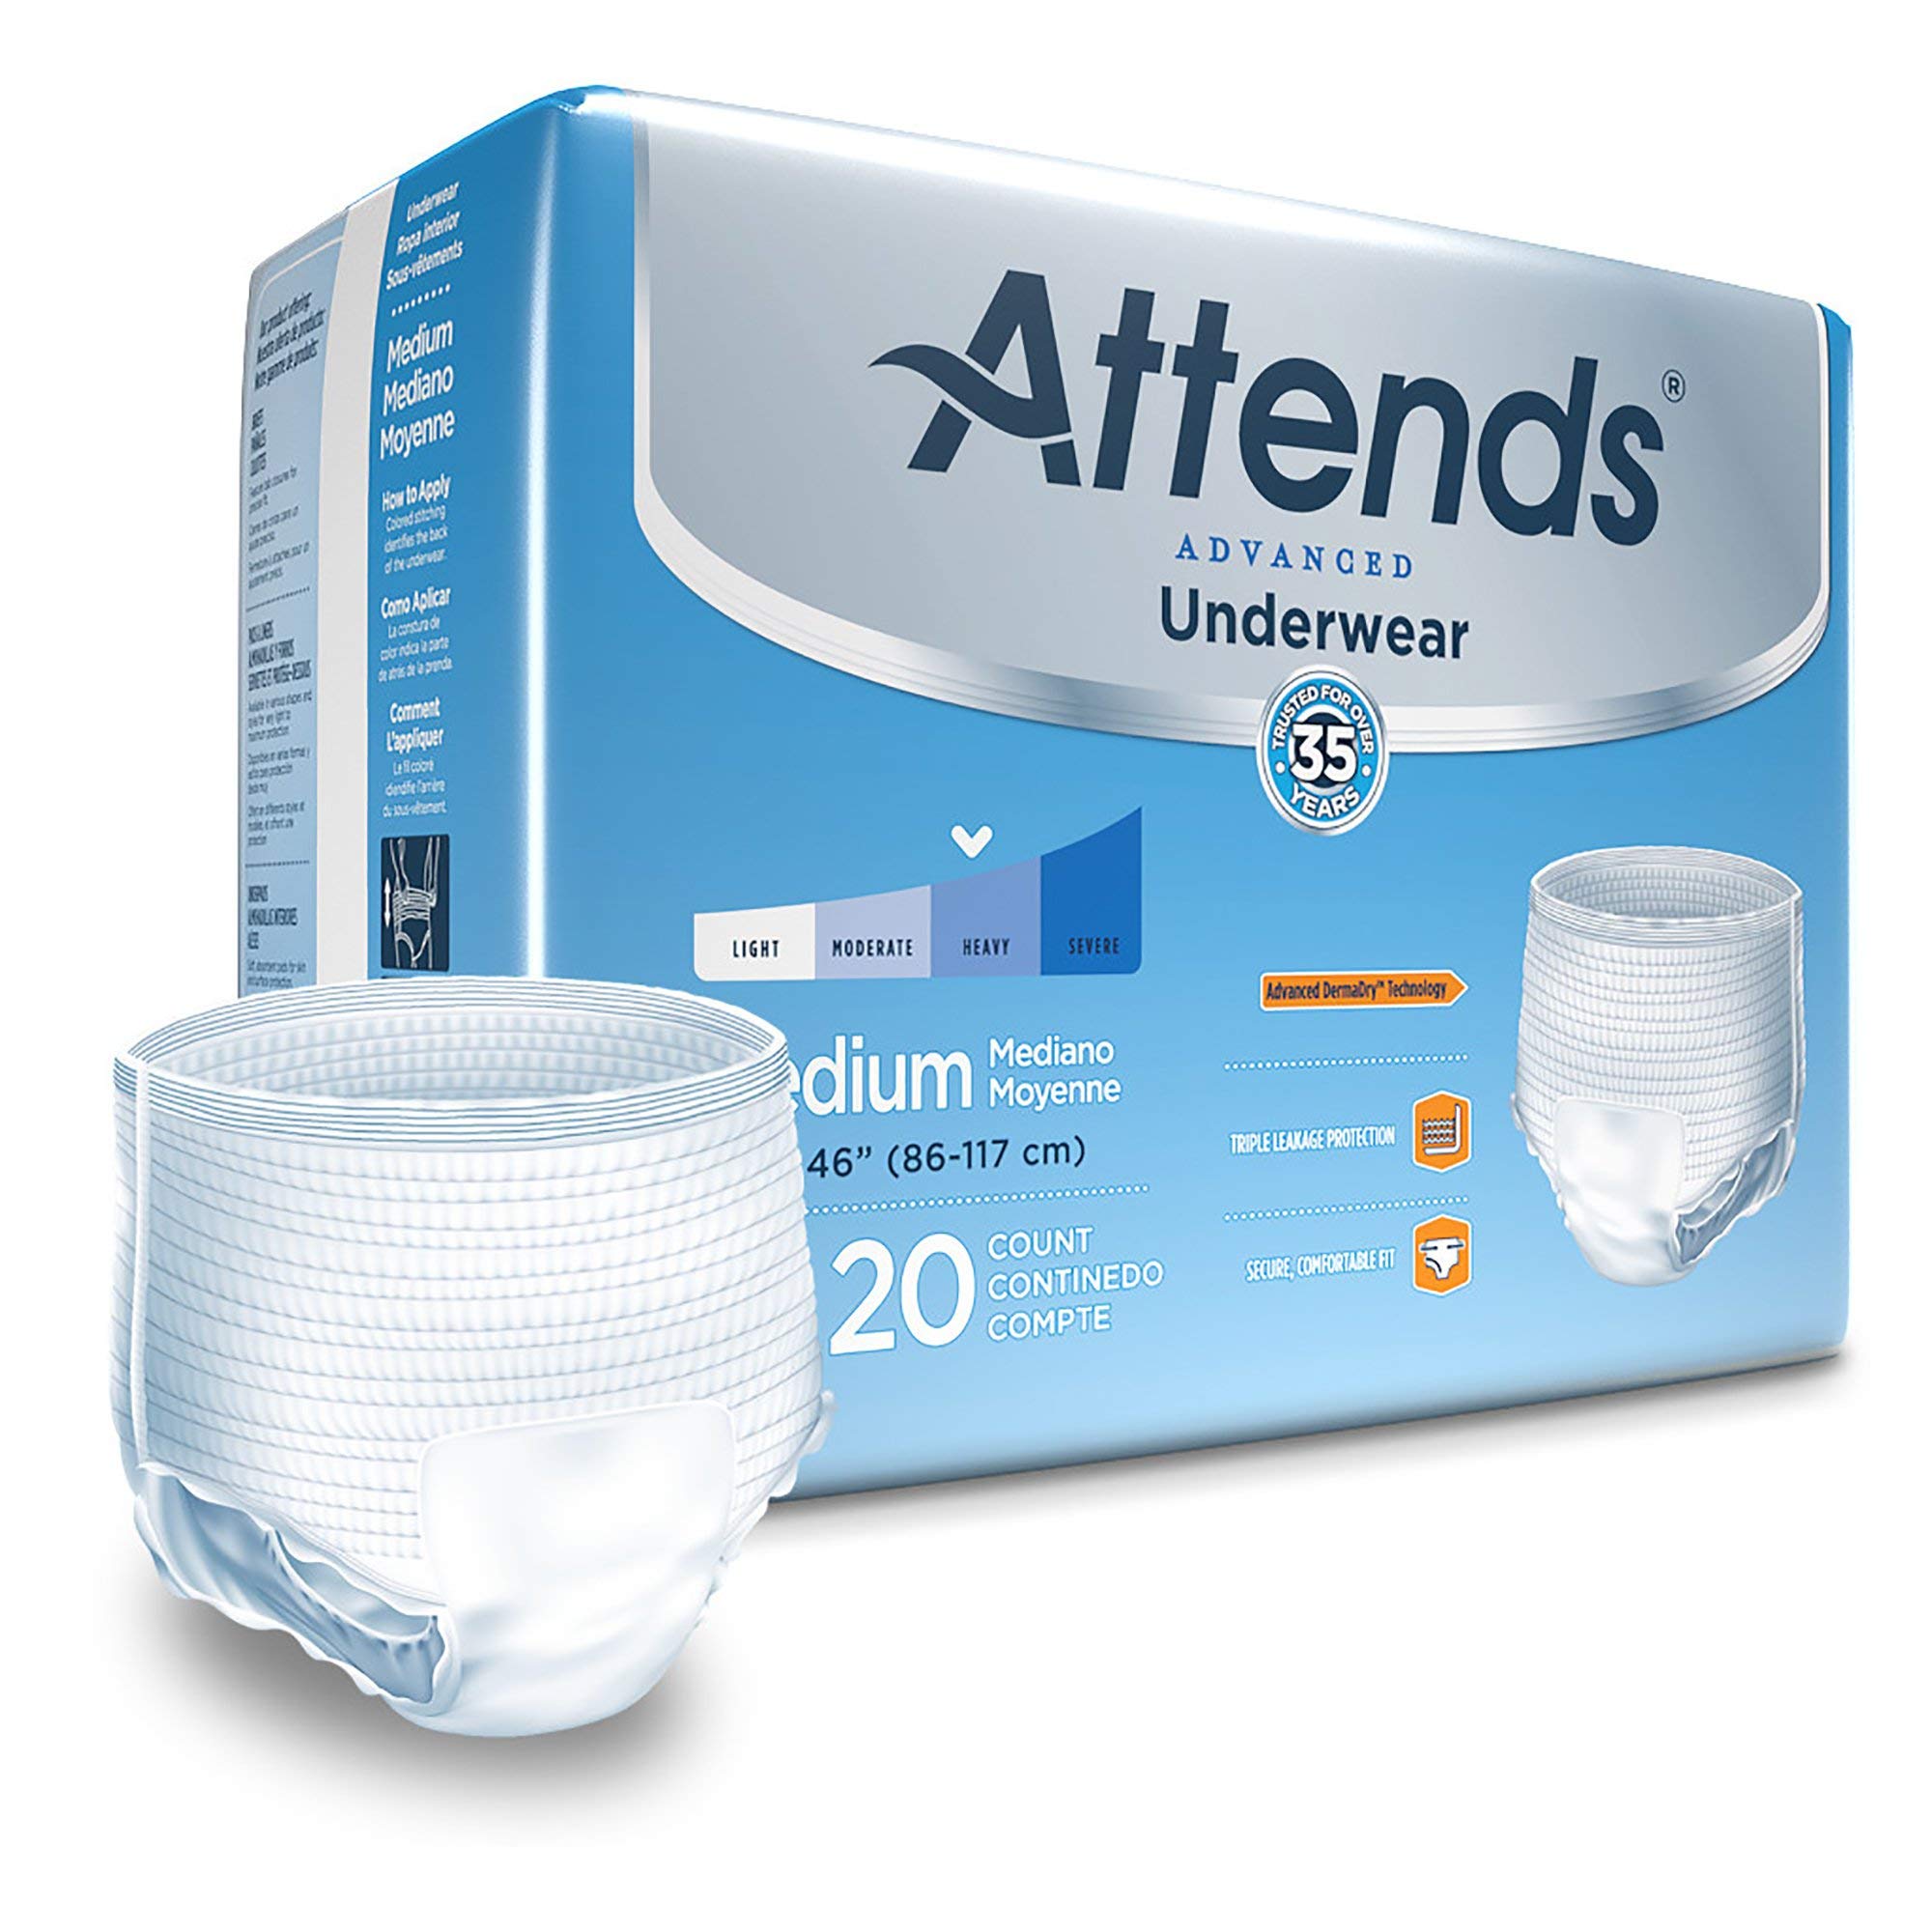 MCK22023101 - Adult Absorbent Underwear Attends Pull On Medium Disposable Heavy Absorbency